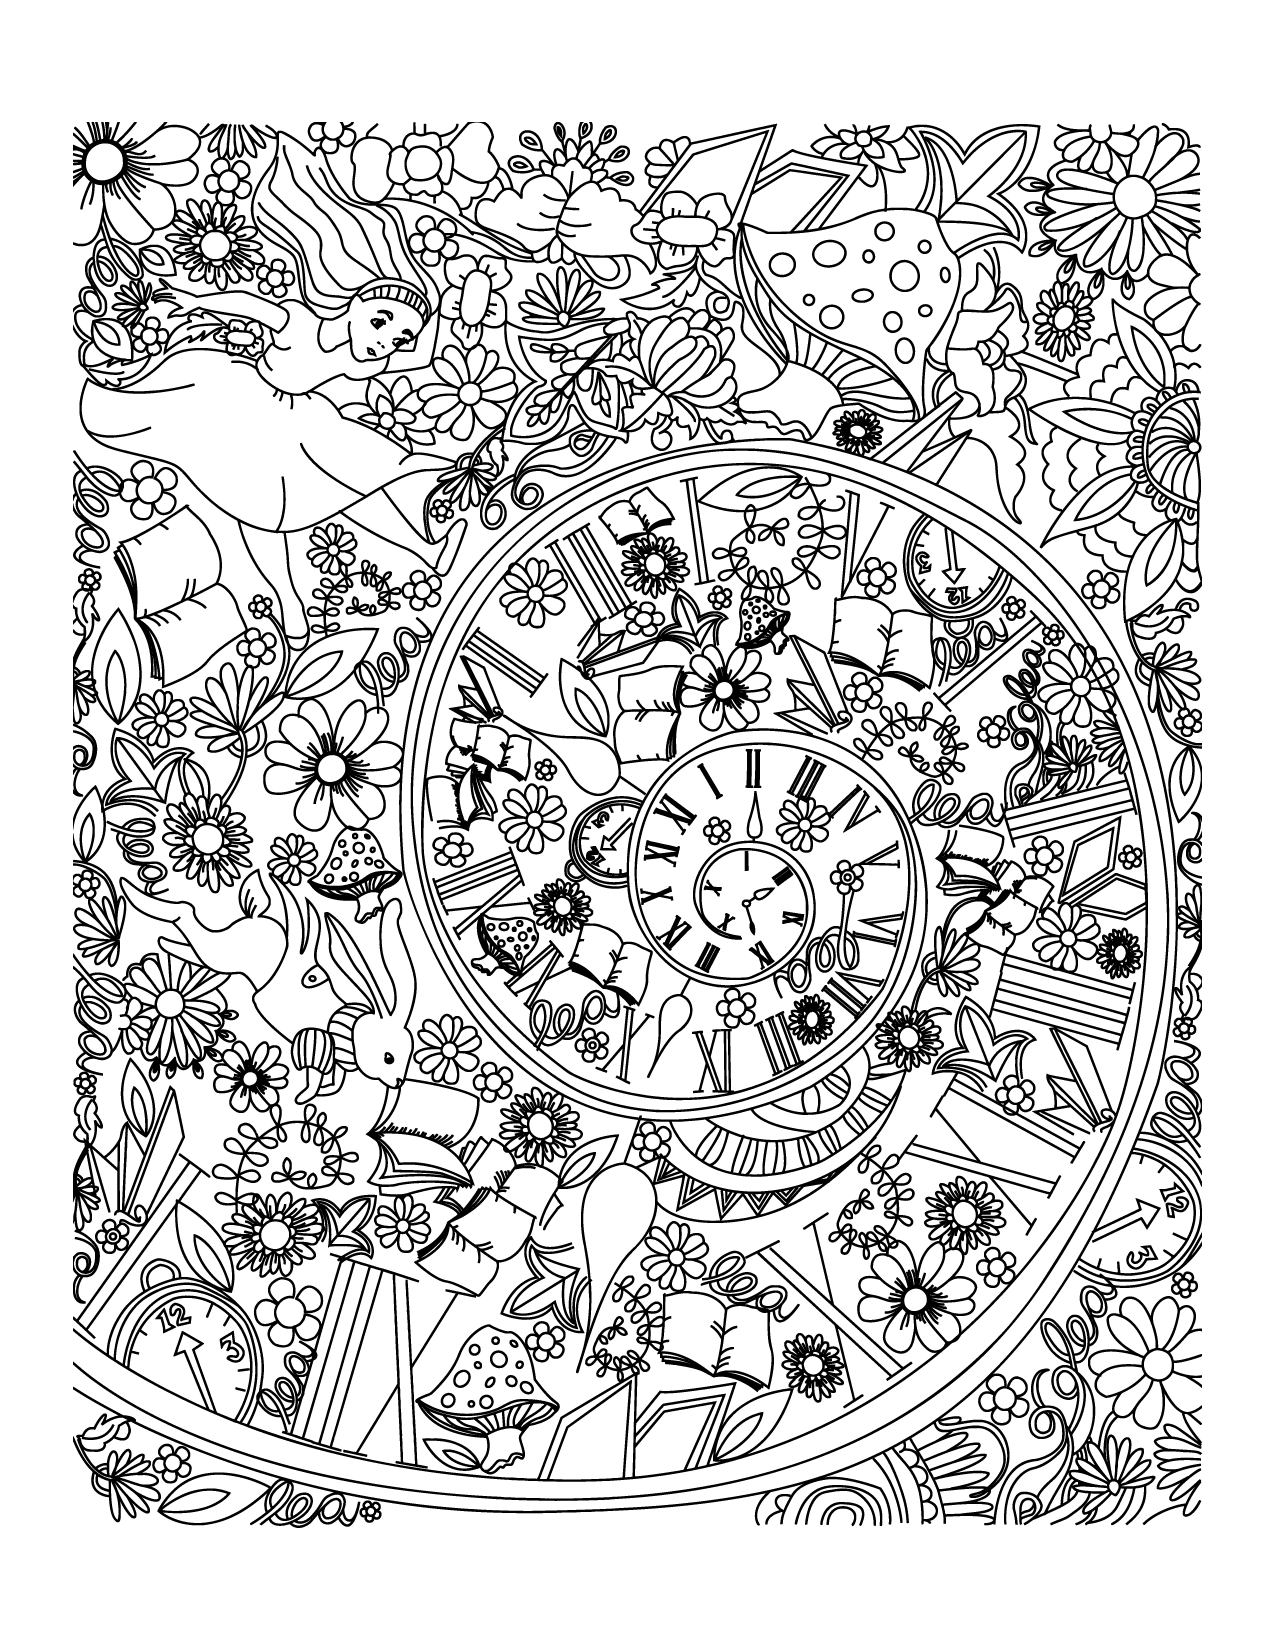 Alice In Wonderland Down The Rabbit Hole Coloring Page